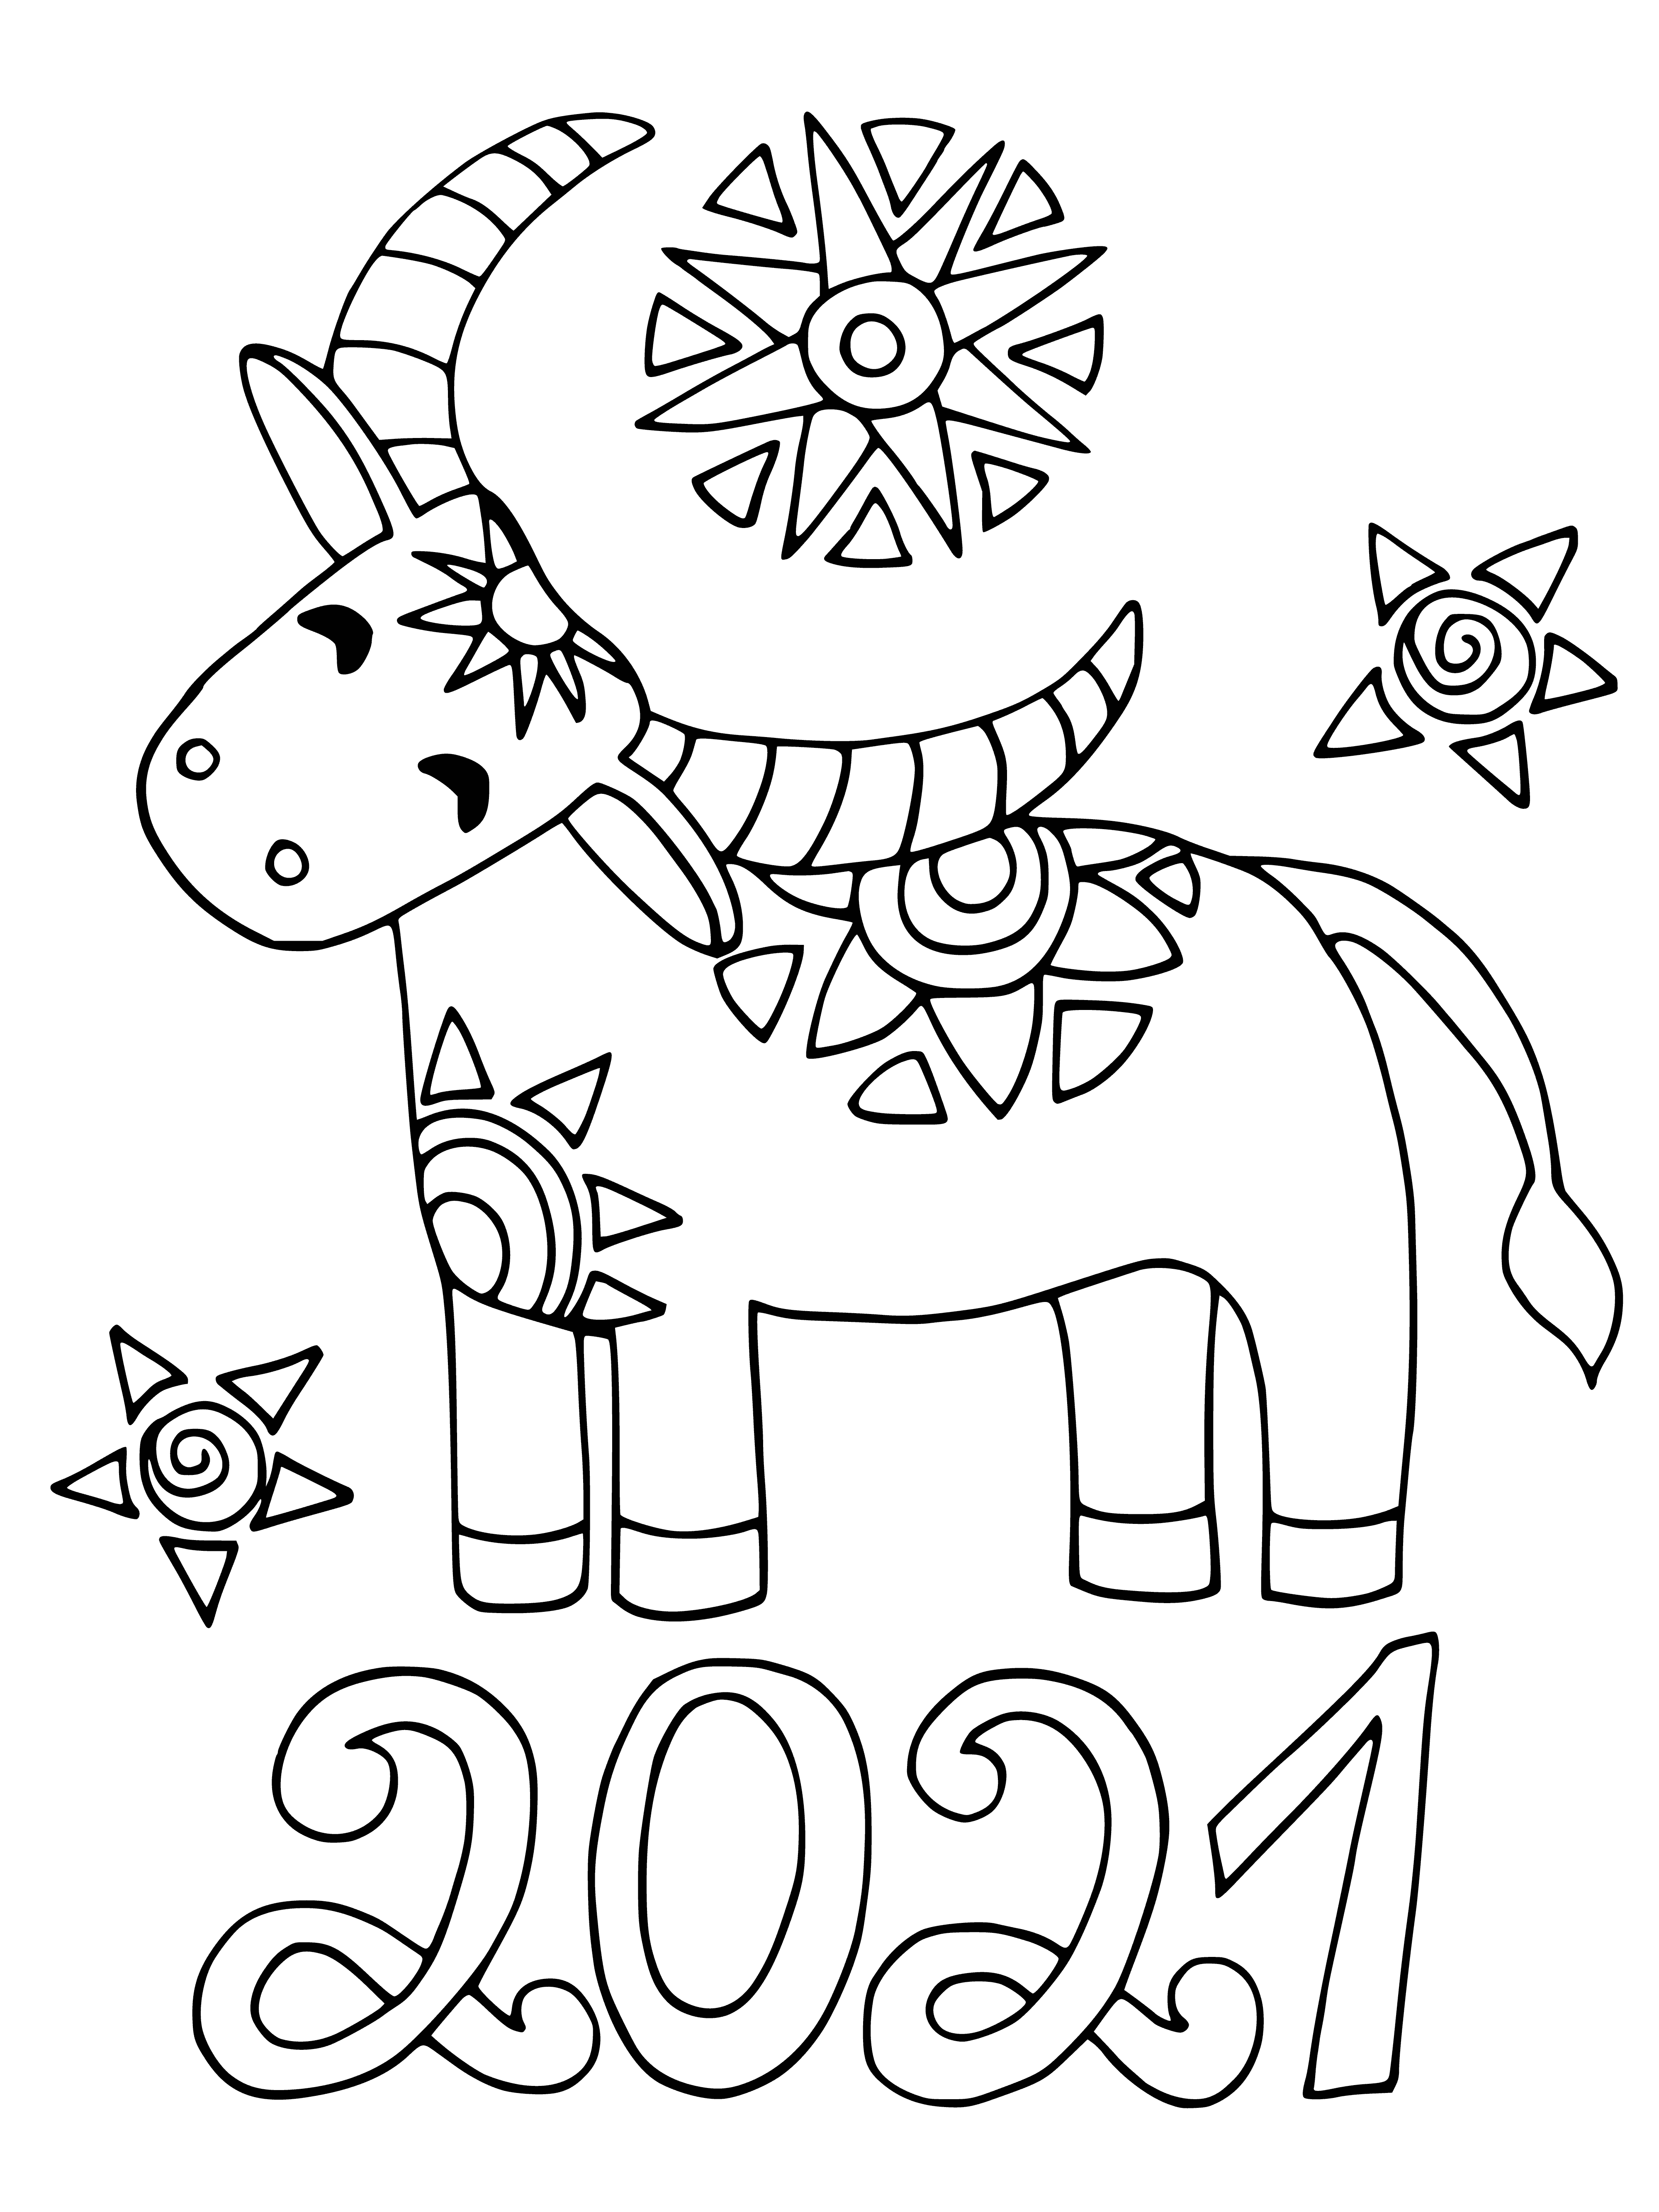 coloring page: Bull with white face, closed eyes and sharp teeth stands strong, fur coat of dark shading and sturdy hooves planted.